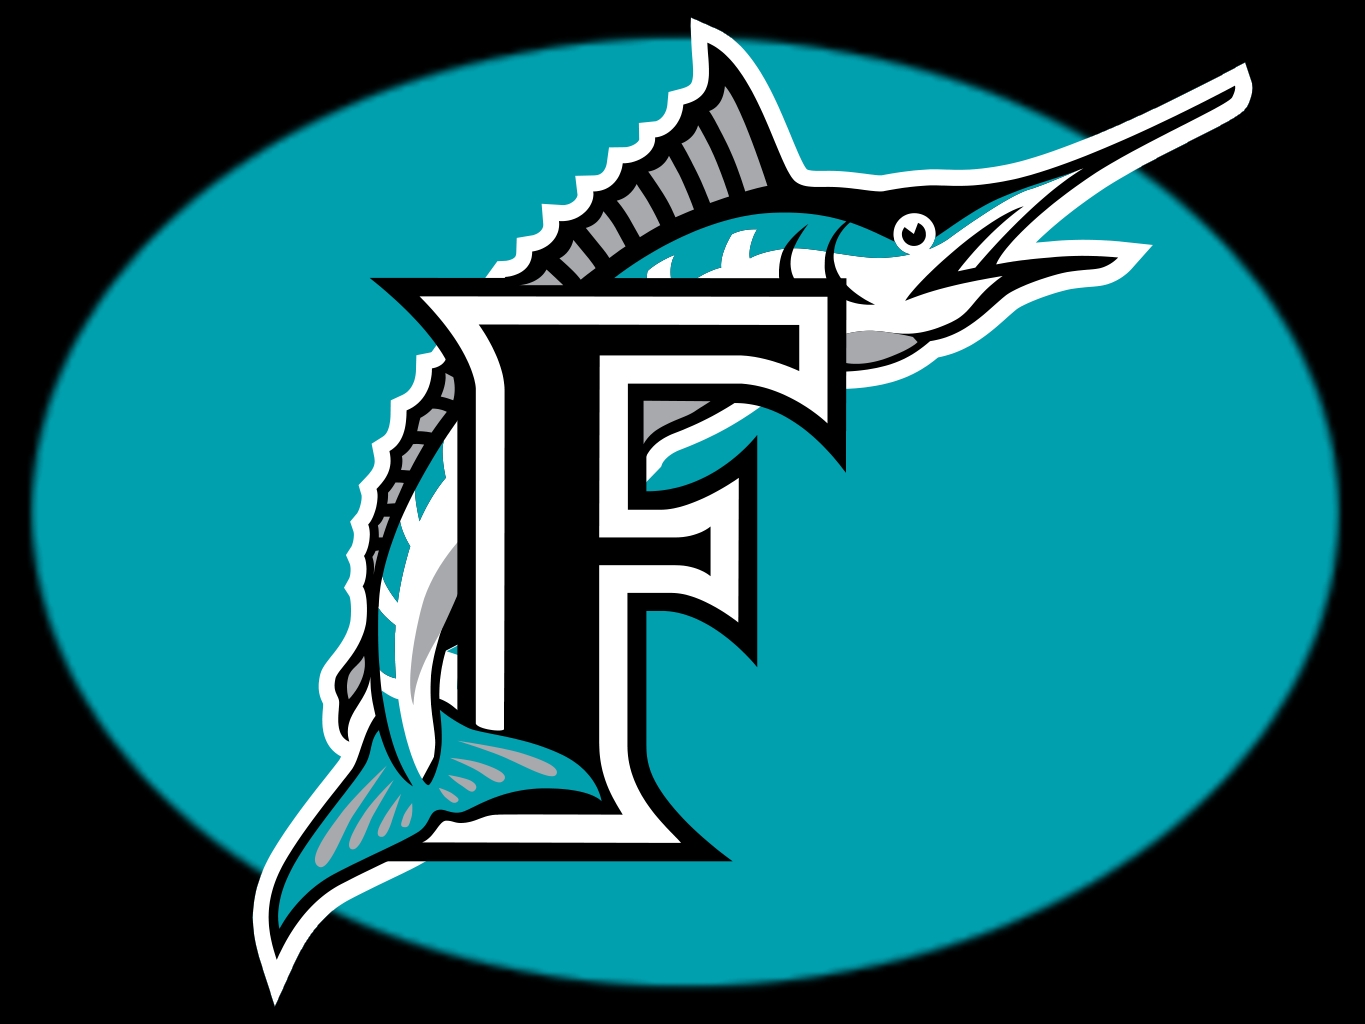 Florida Marlins wallpaper by eddy0513 - Download on ZEDGE™